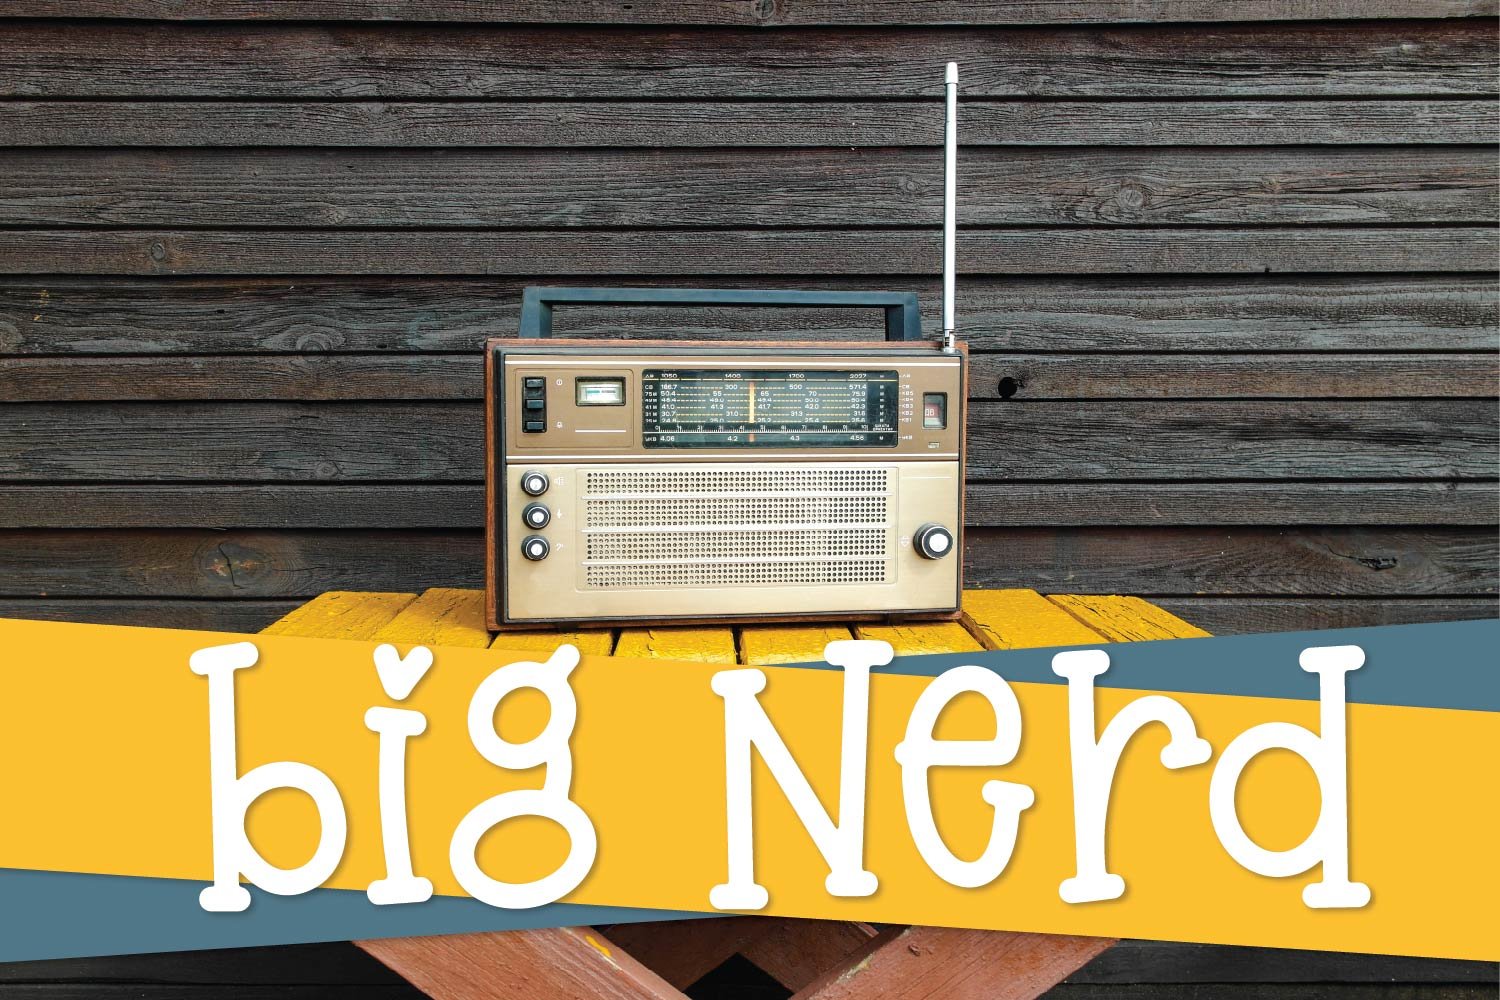 Big Nerd - A Fun Hand Lettered Serif cover image.